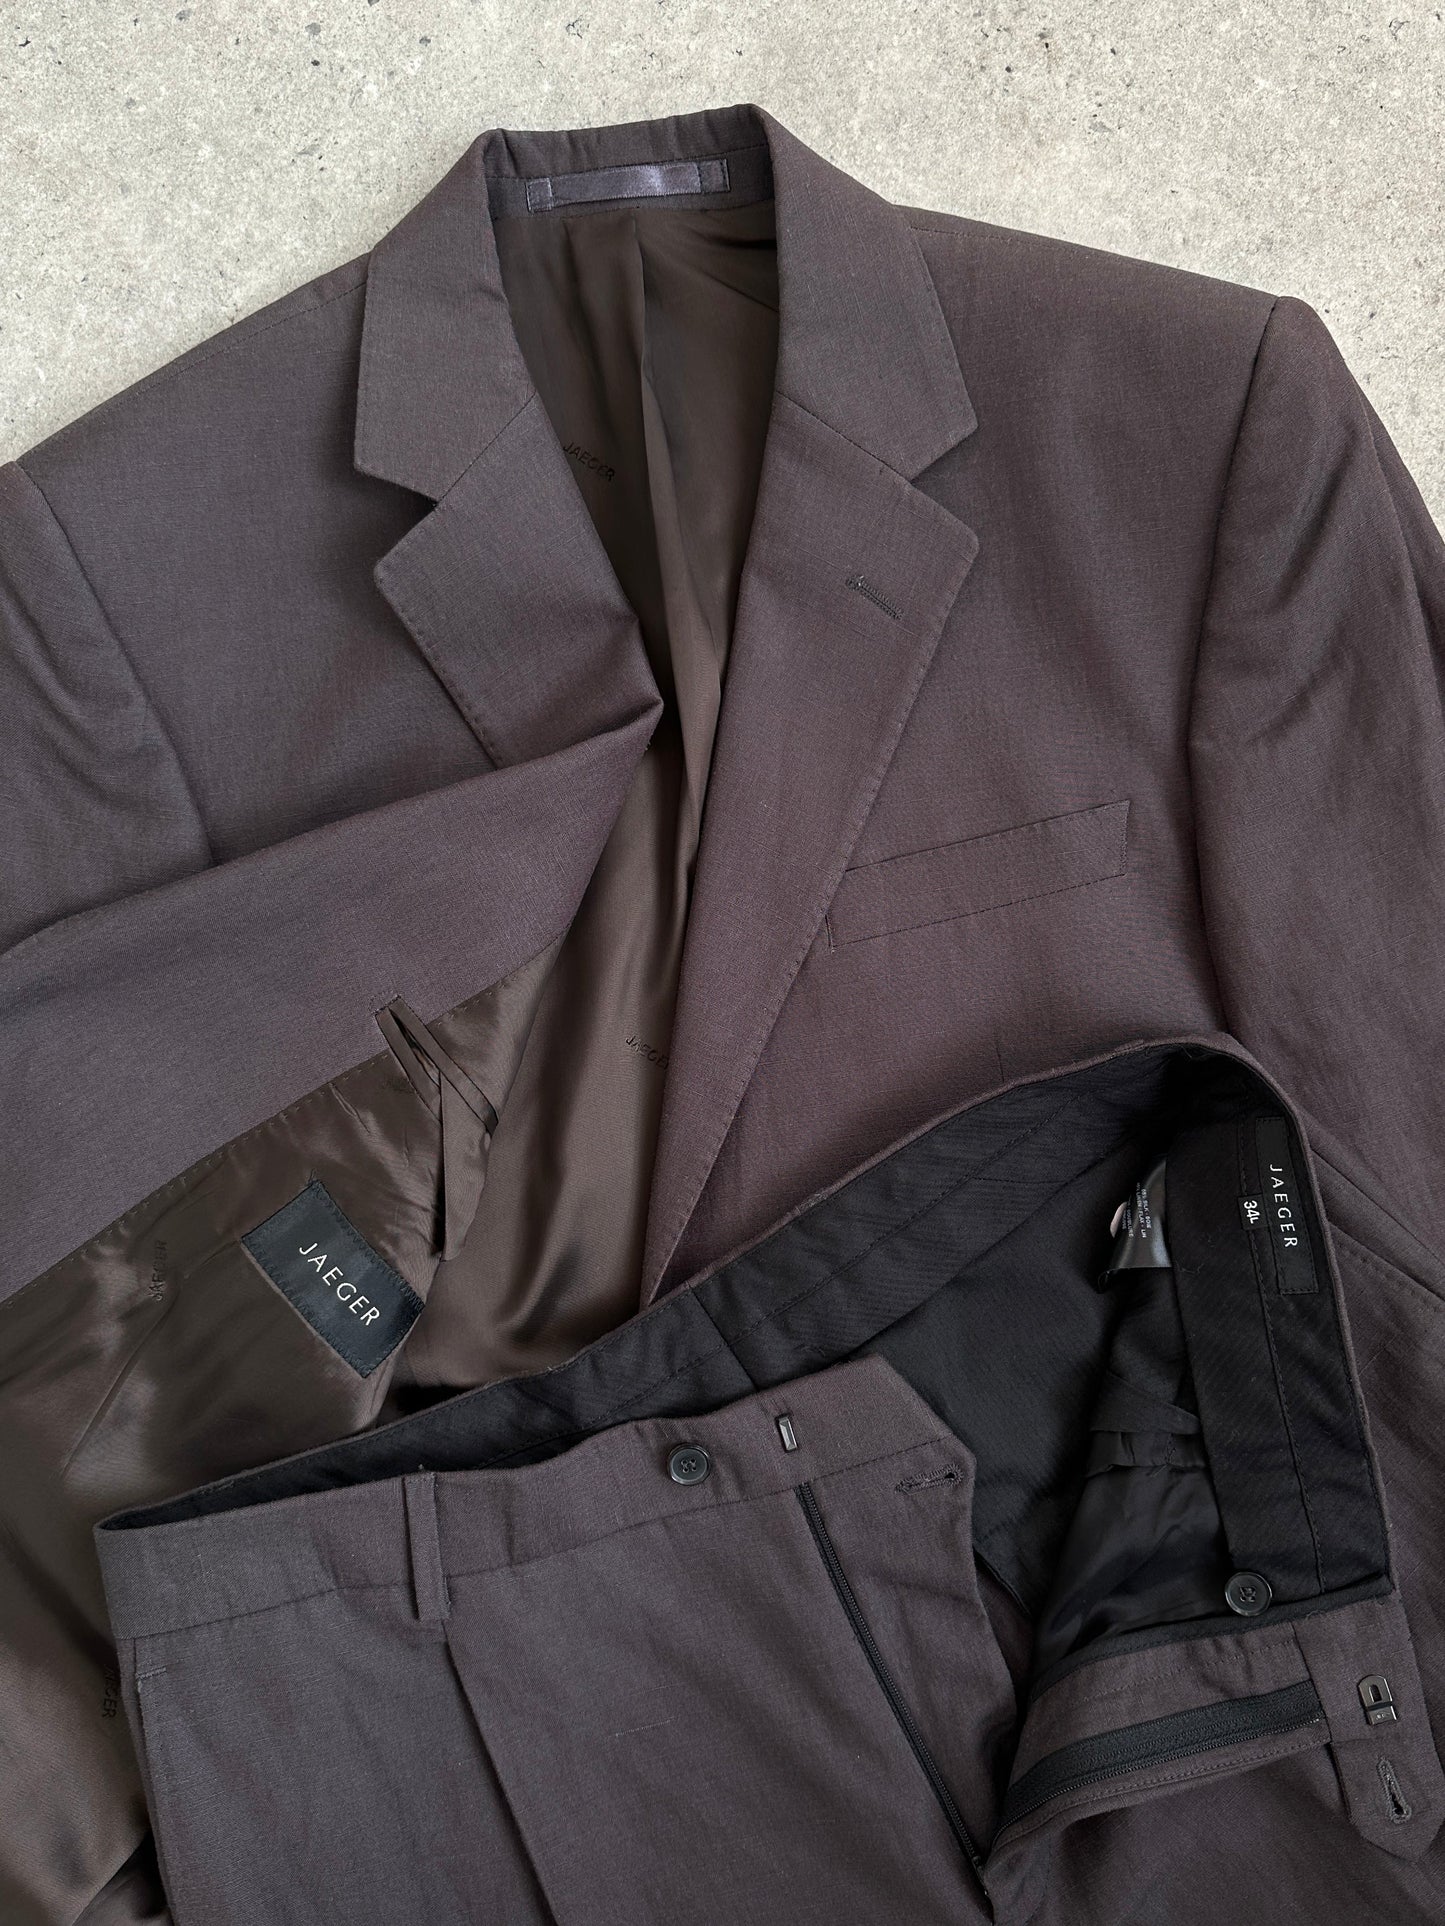 Jaeger Silk Linen Single Breasted Suit - 40R/34L